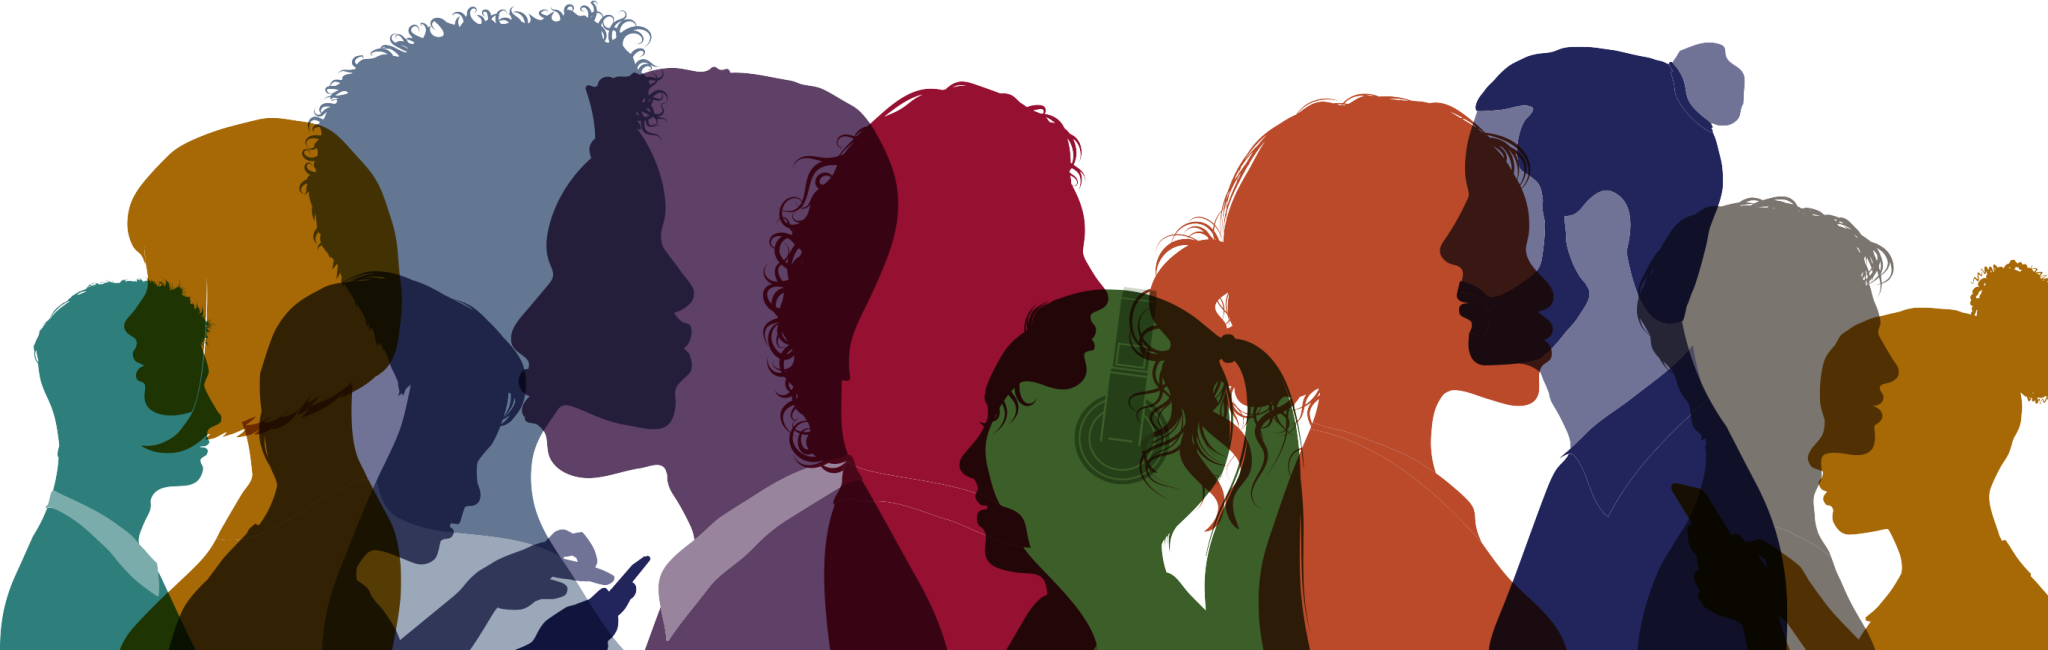 Multi coloured graphic depicting silhouettes of human heads